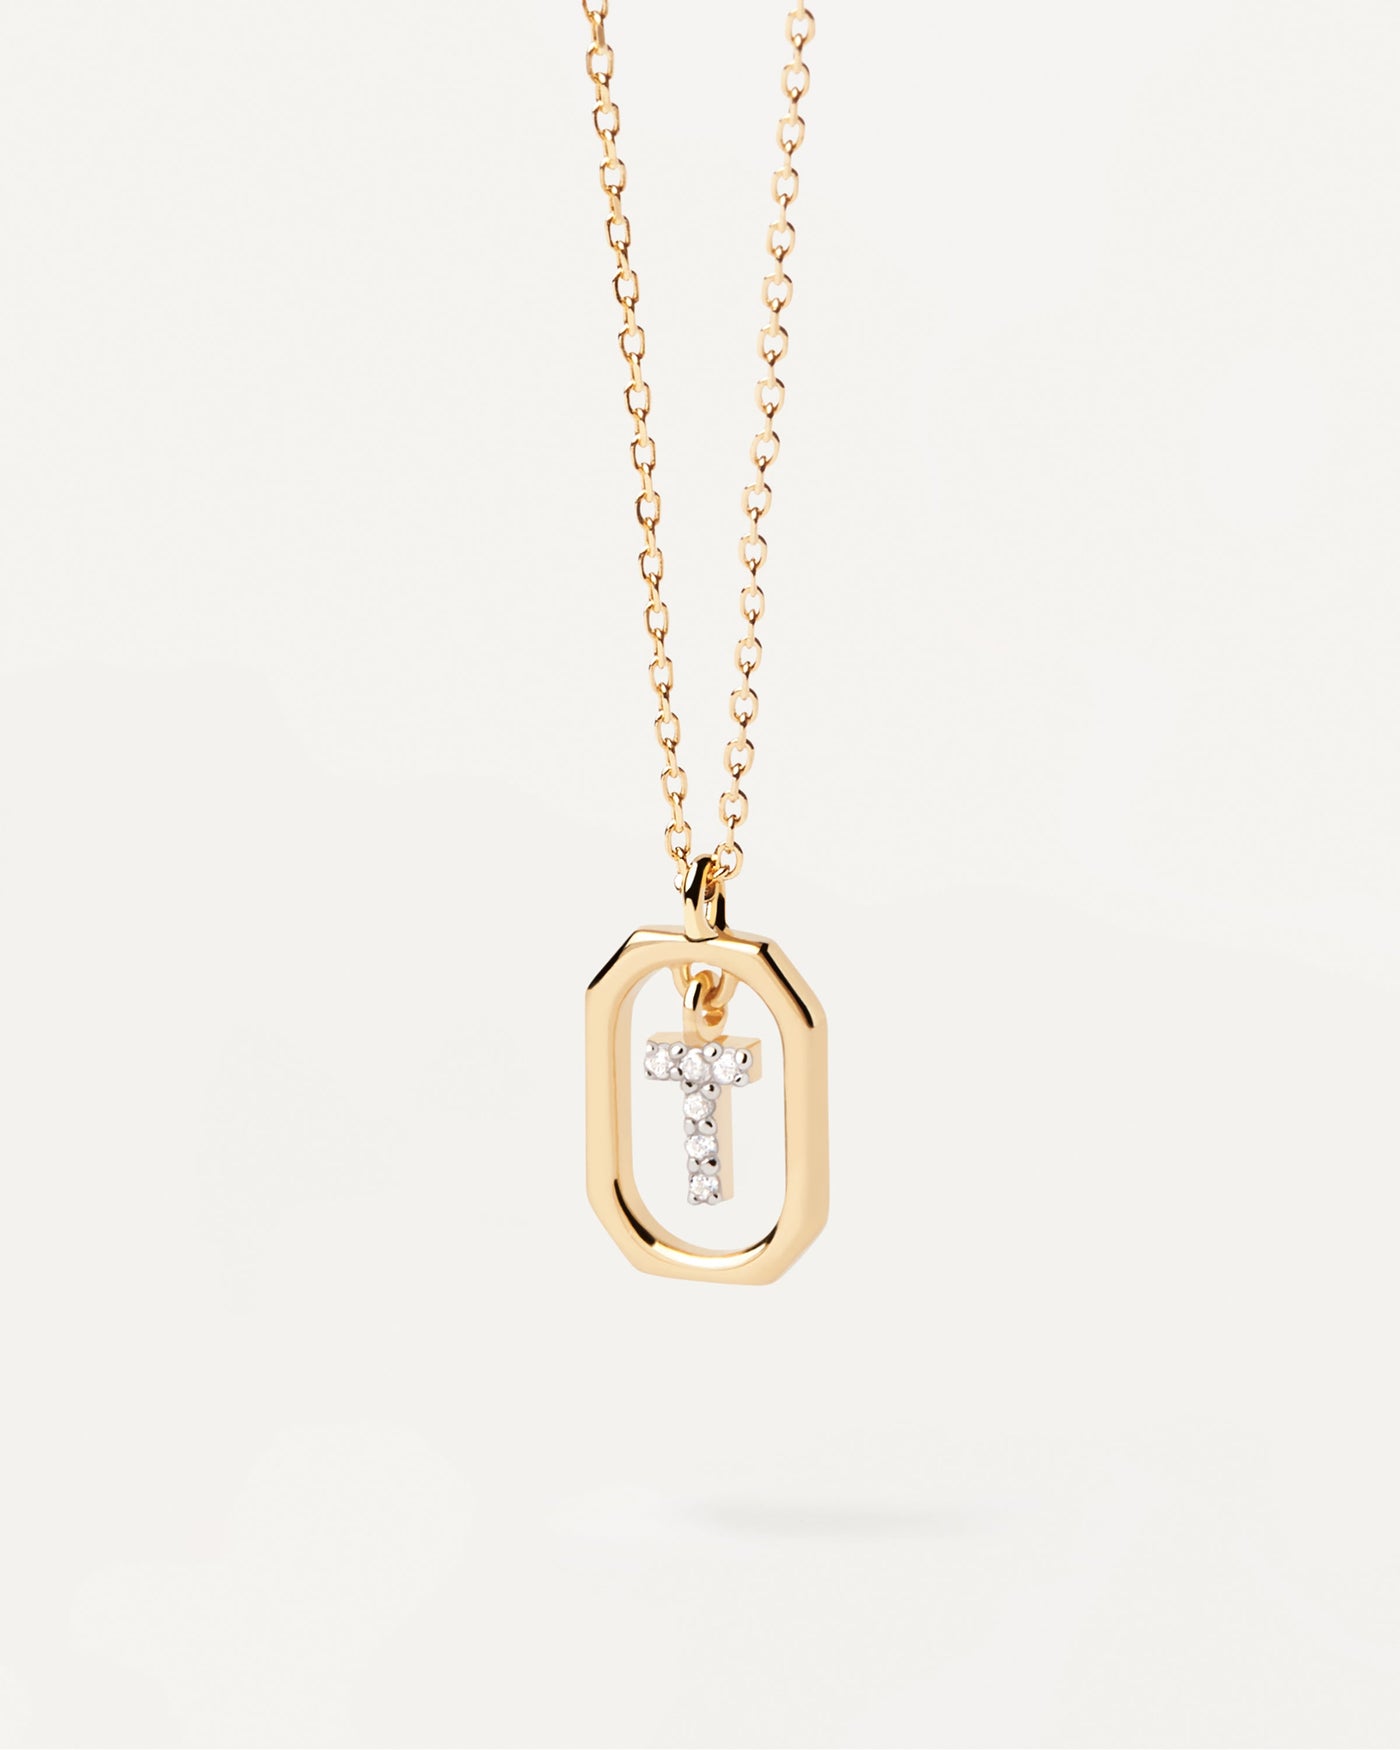 2023 Selection | Mini Letter T Necklace. Small initial T necklace in zirconia inside gold-plated silver octagonal pendant. Get the latest arrival from PDPAOLA. Place your order safely and get this Best Seller. Free Shipping.